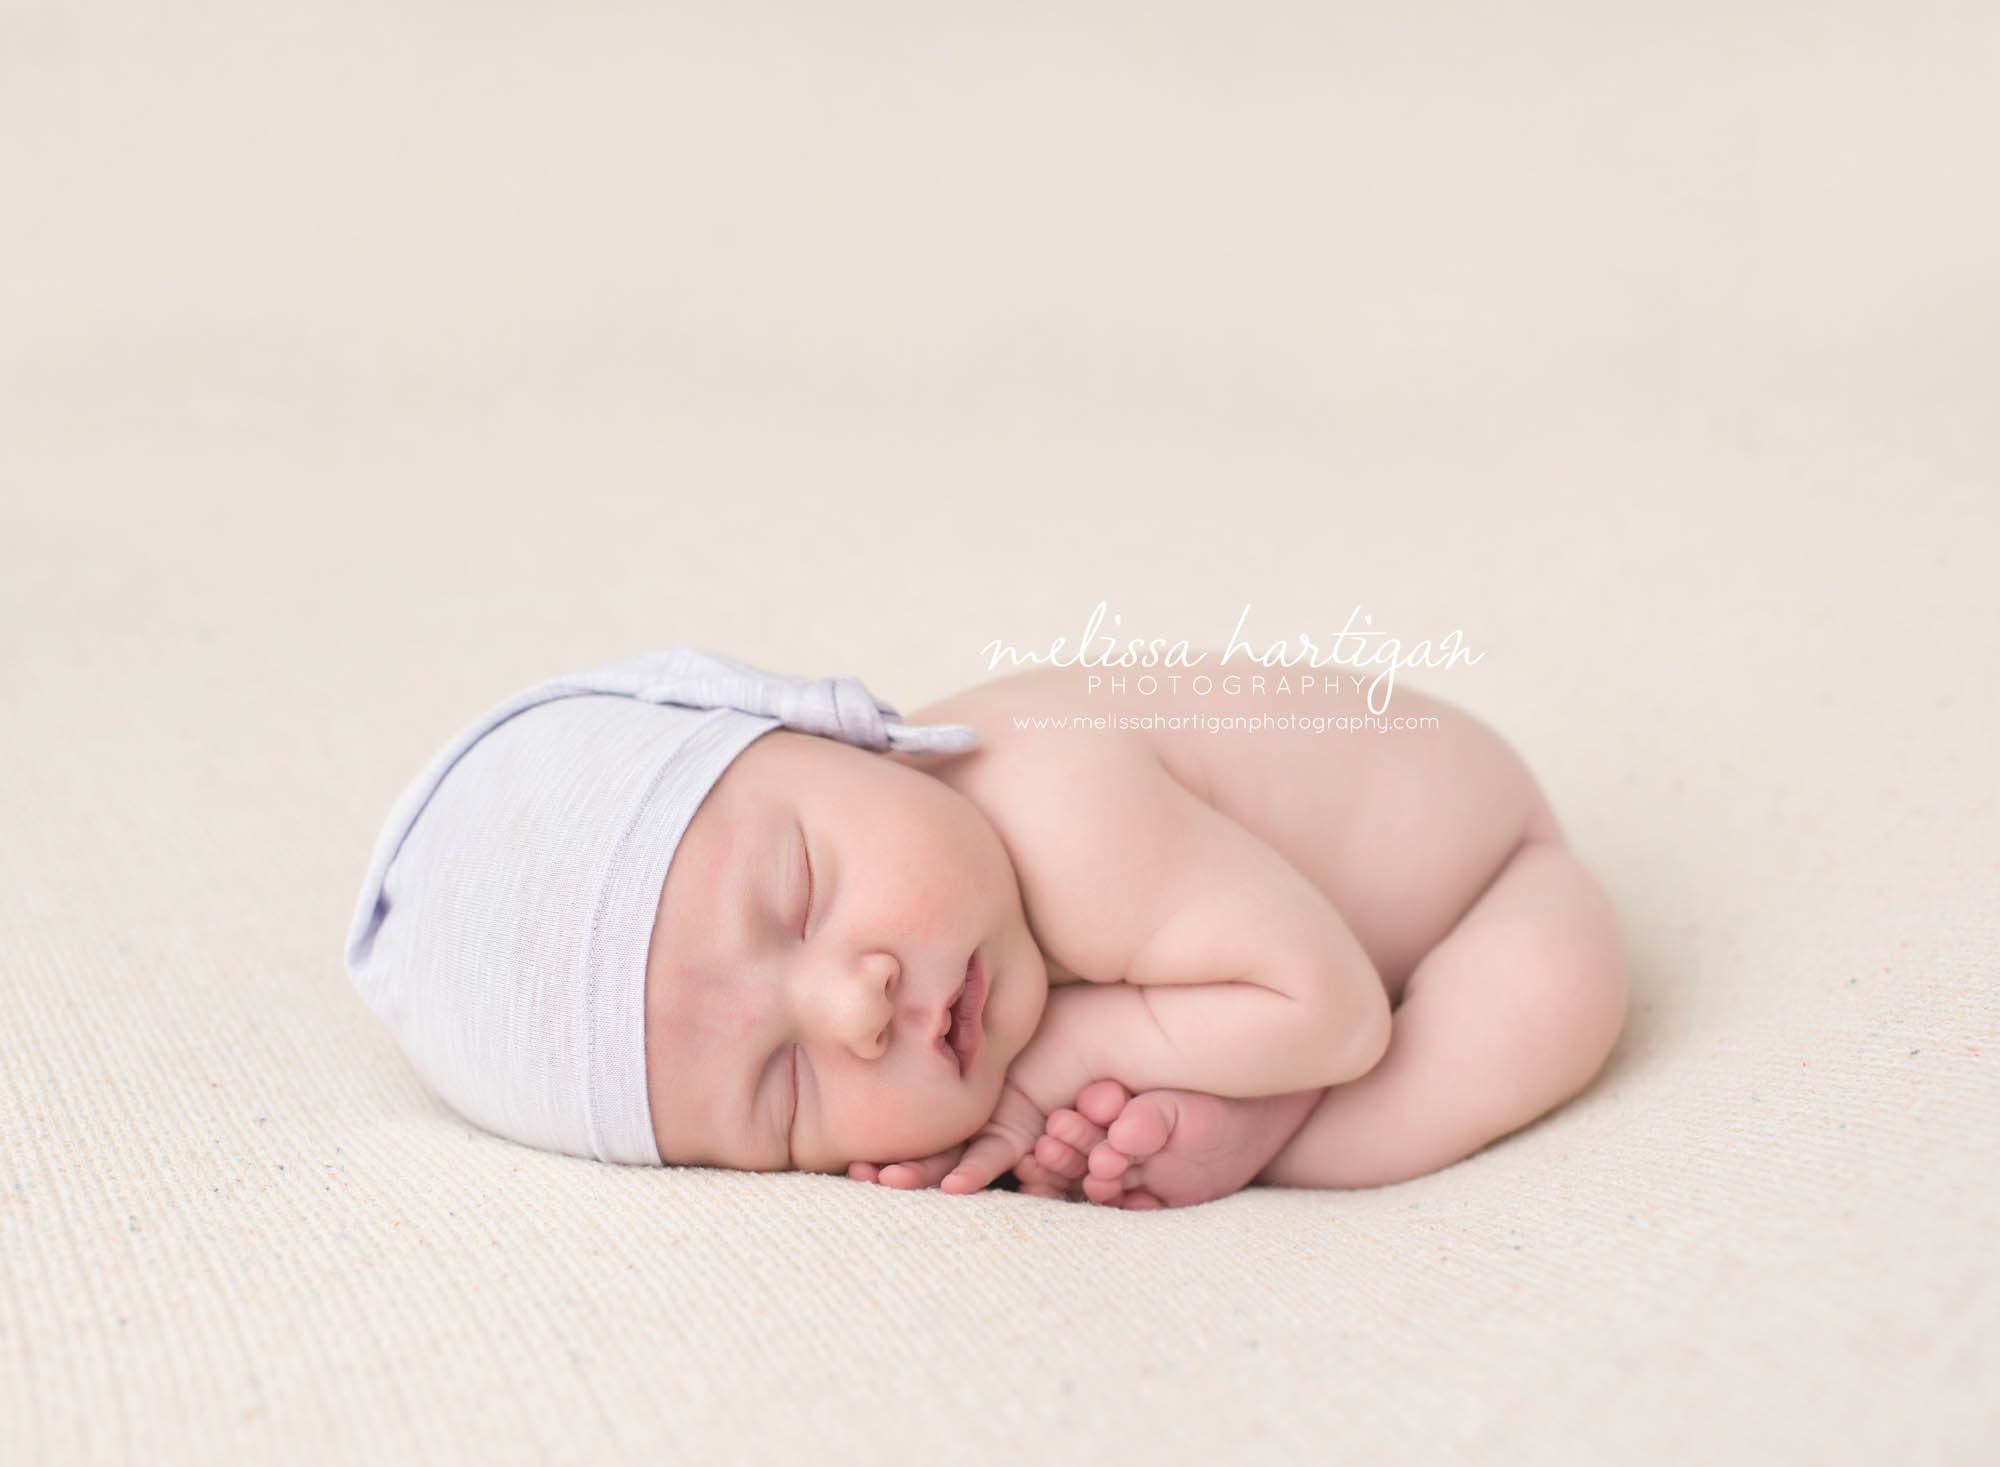 Melissa Hartigan Photography Connecticut Newborn Photographer Coventry Ct Middlefield CT baby Fairfield county Baby girl blue knit cap on pale pink blanket sleeping CT newborn session